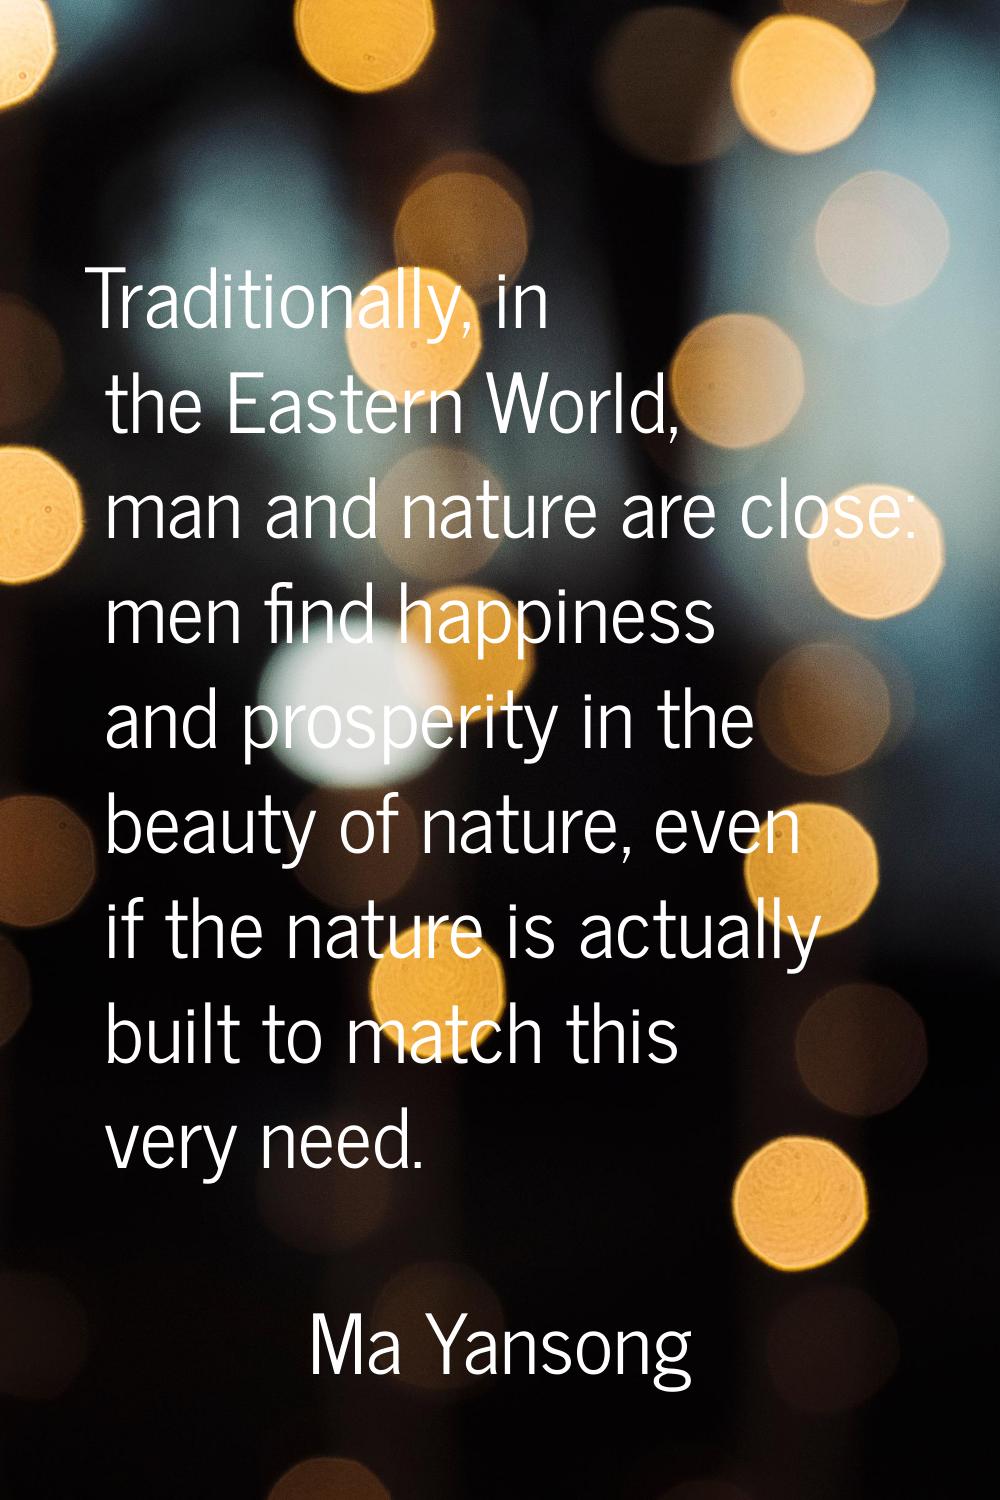 Traditionally, in the Eastern World, man and nature are close: men find happiness and prosperity in